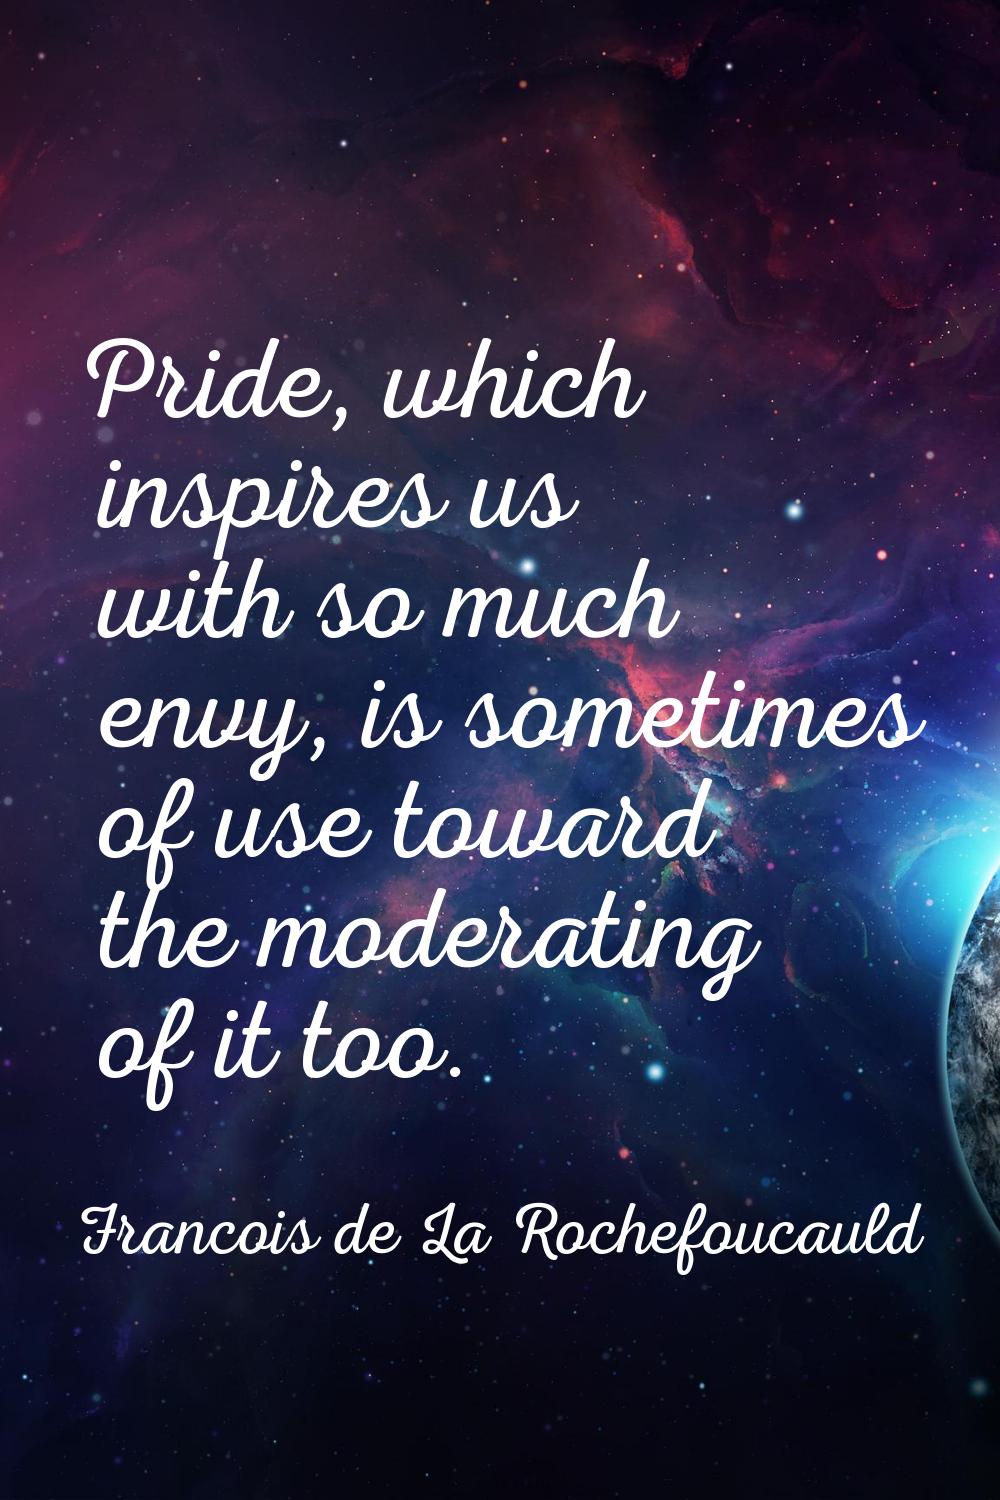 Pride, which inspires us with so much envy, is sometimes of use toward the moderating of it too.